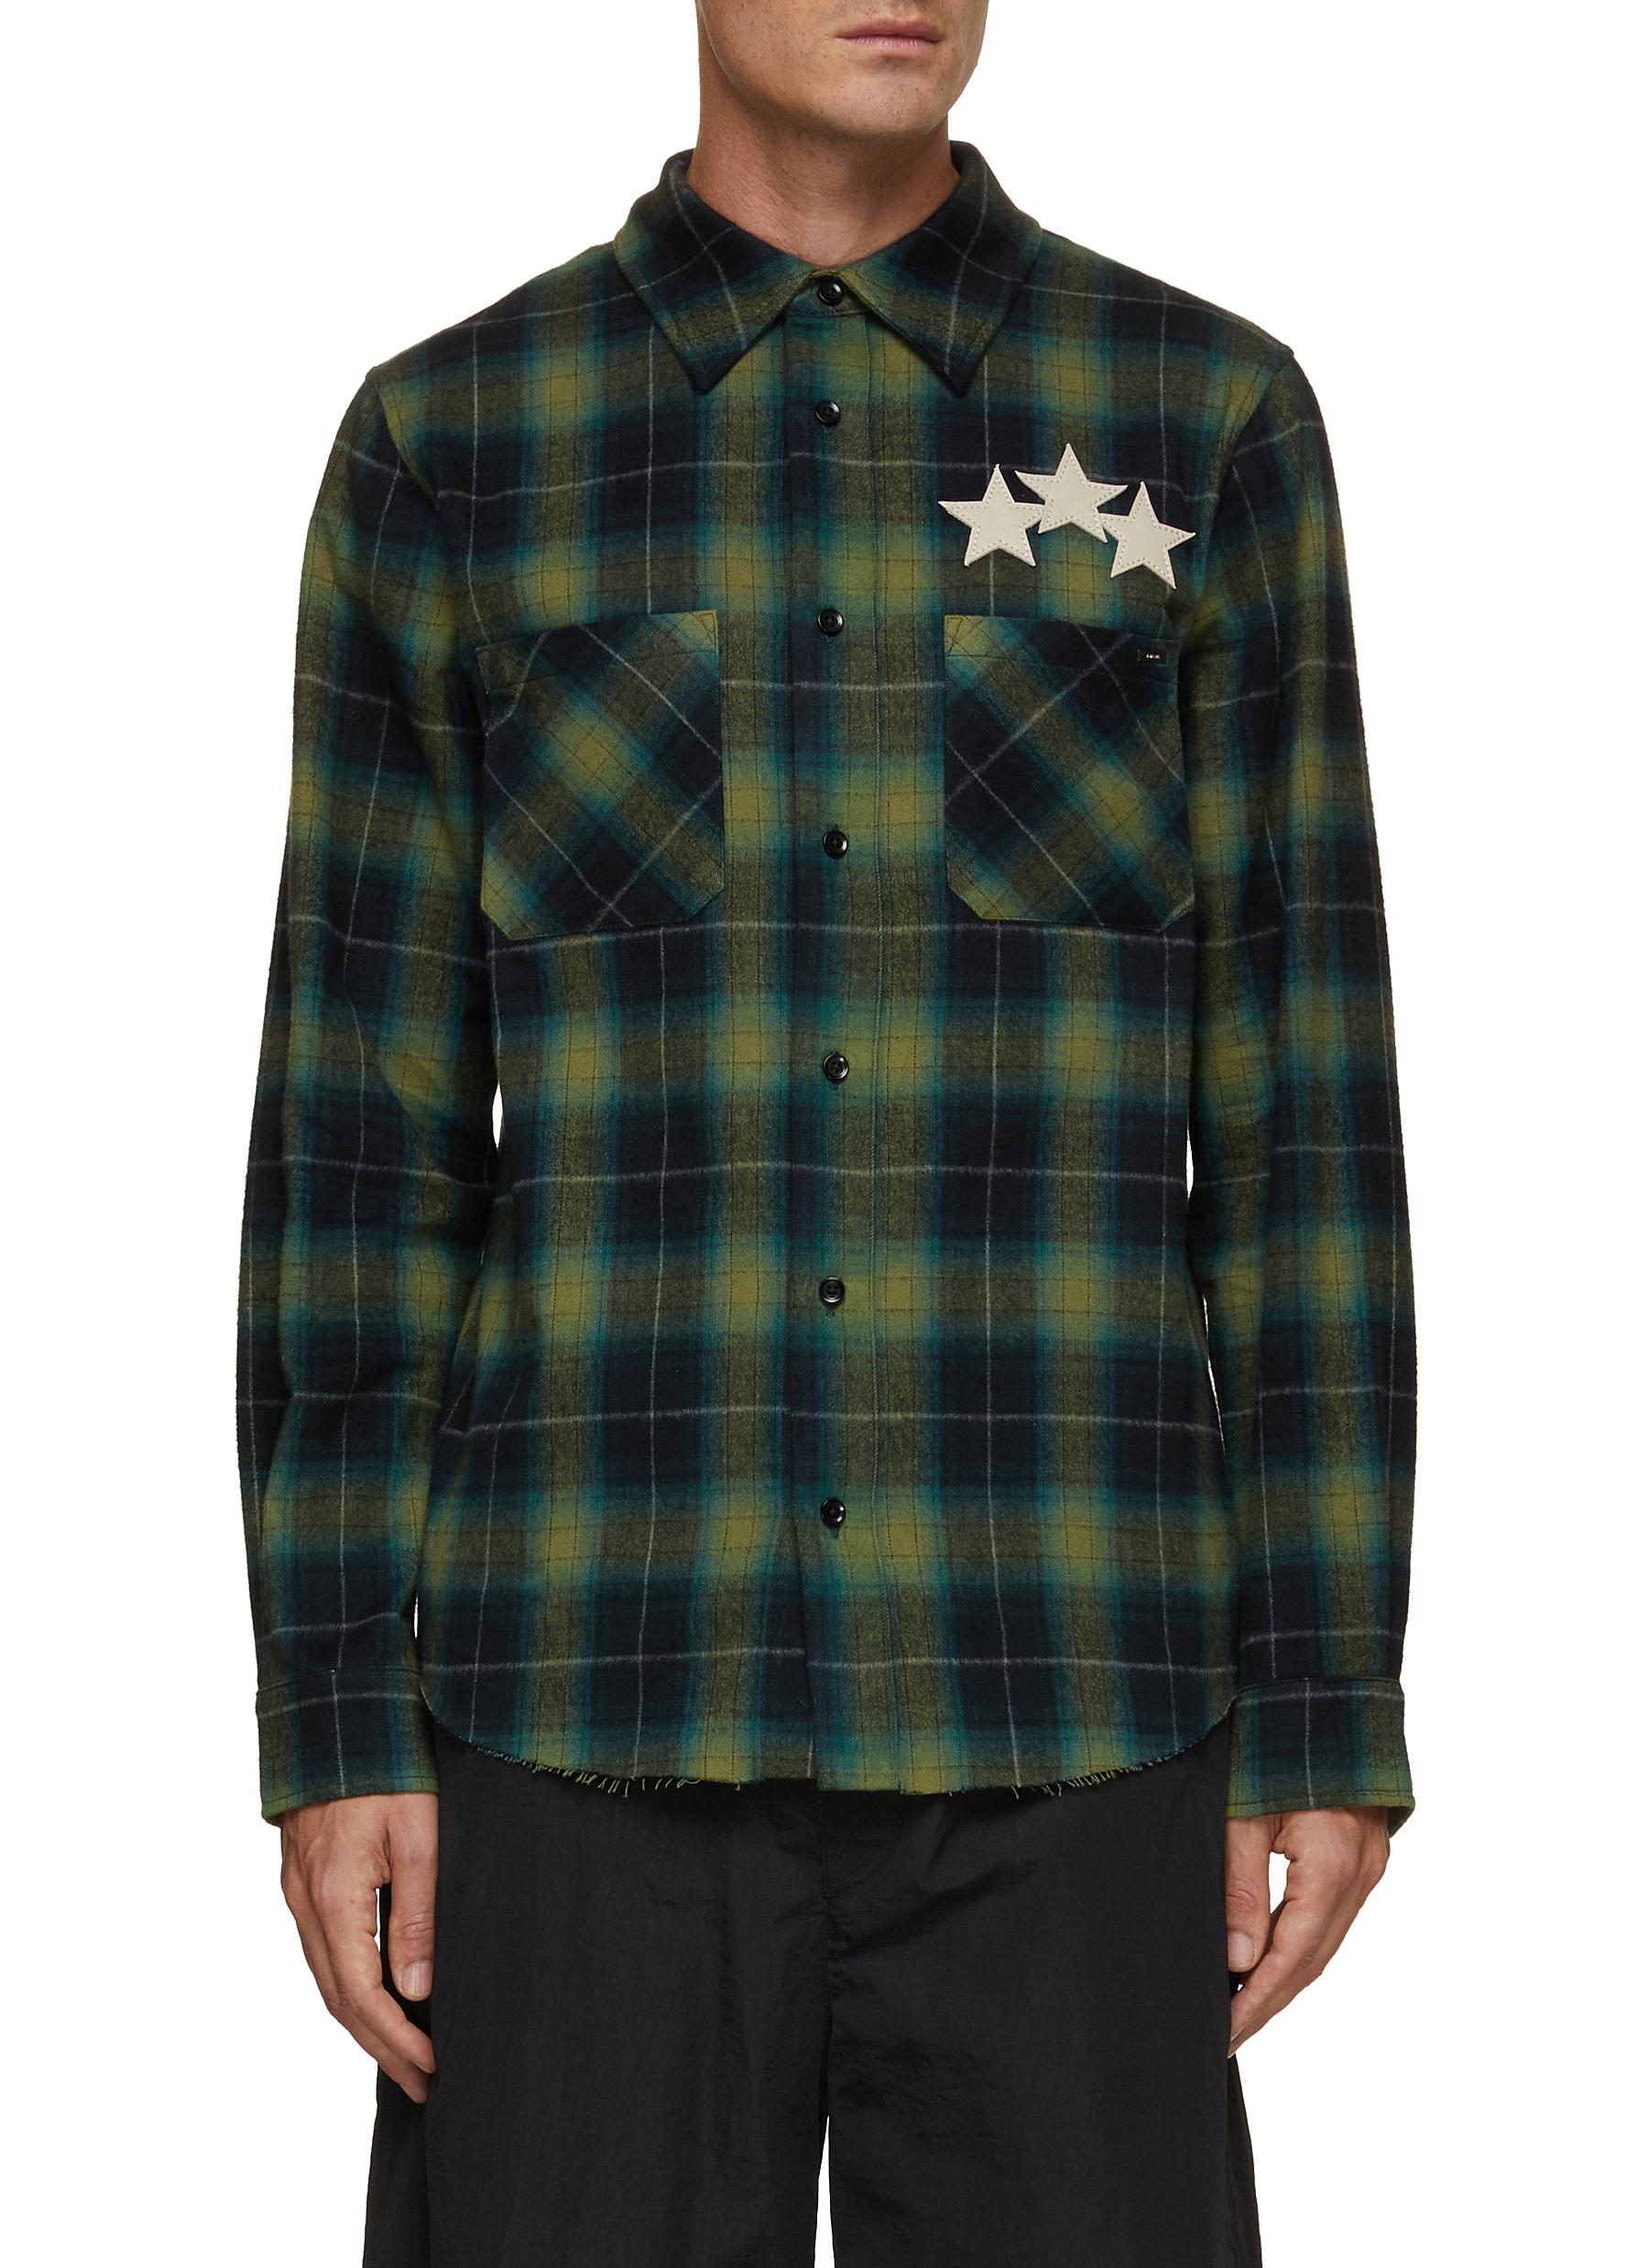 Leather Star Applique Flannel Shirt